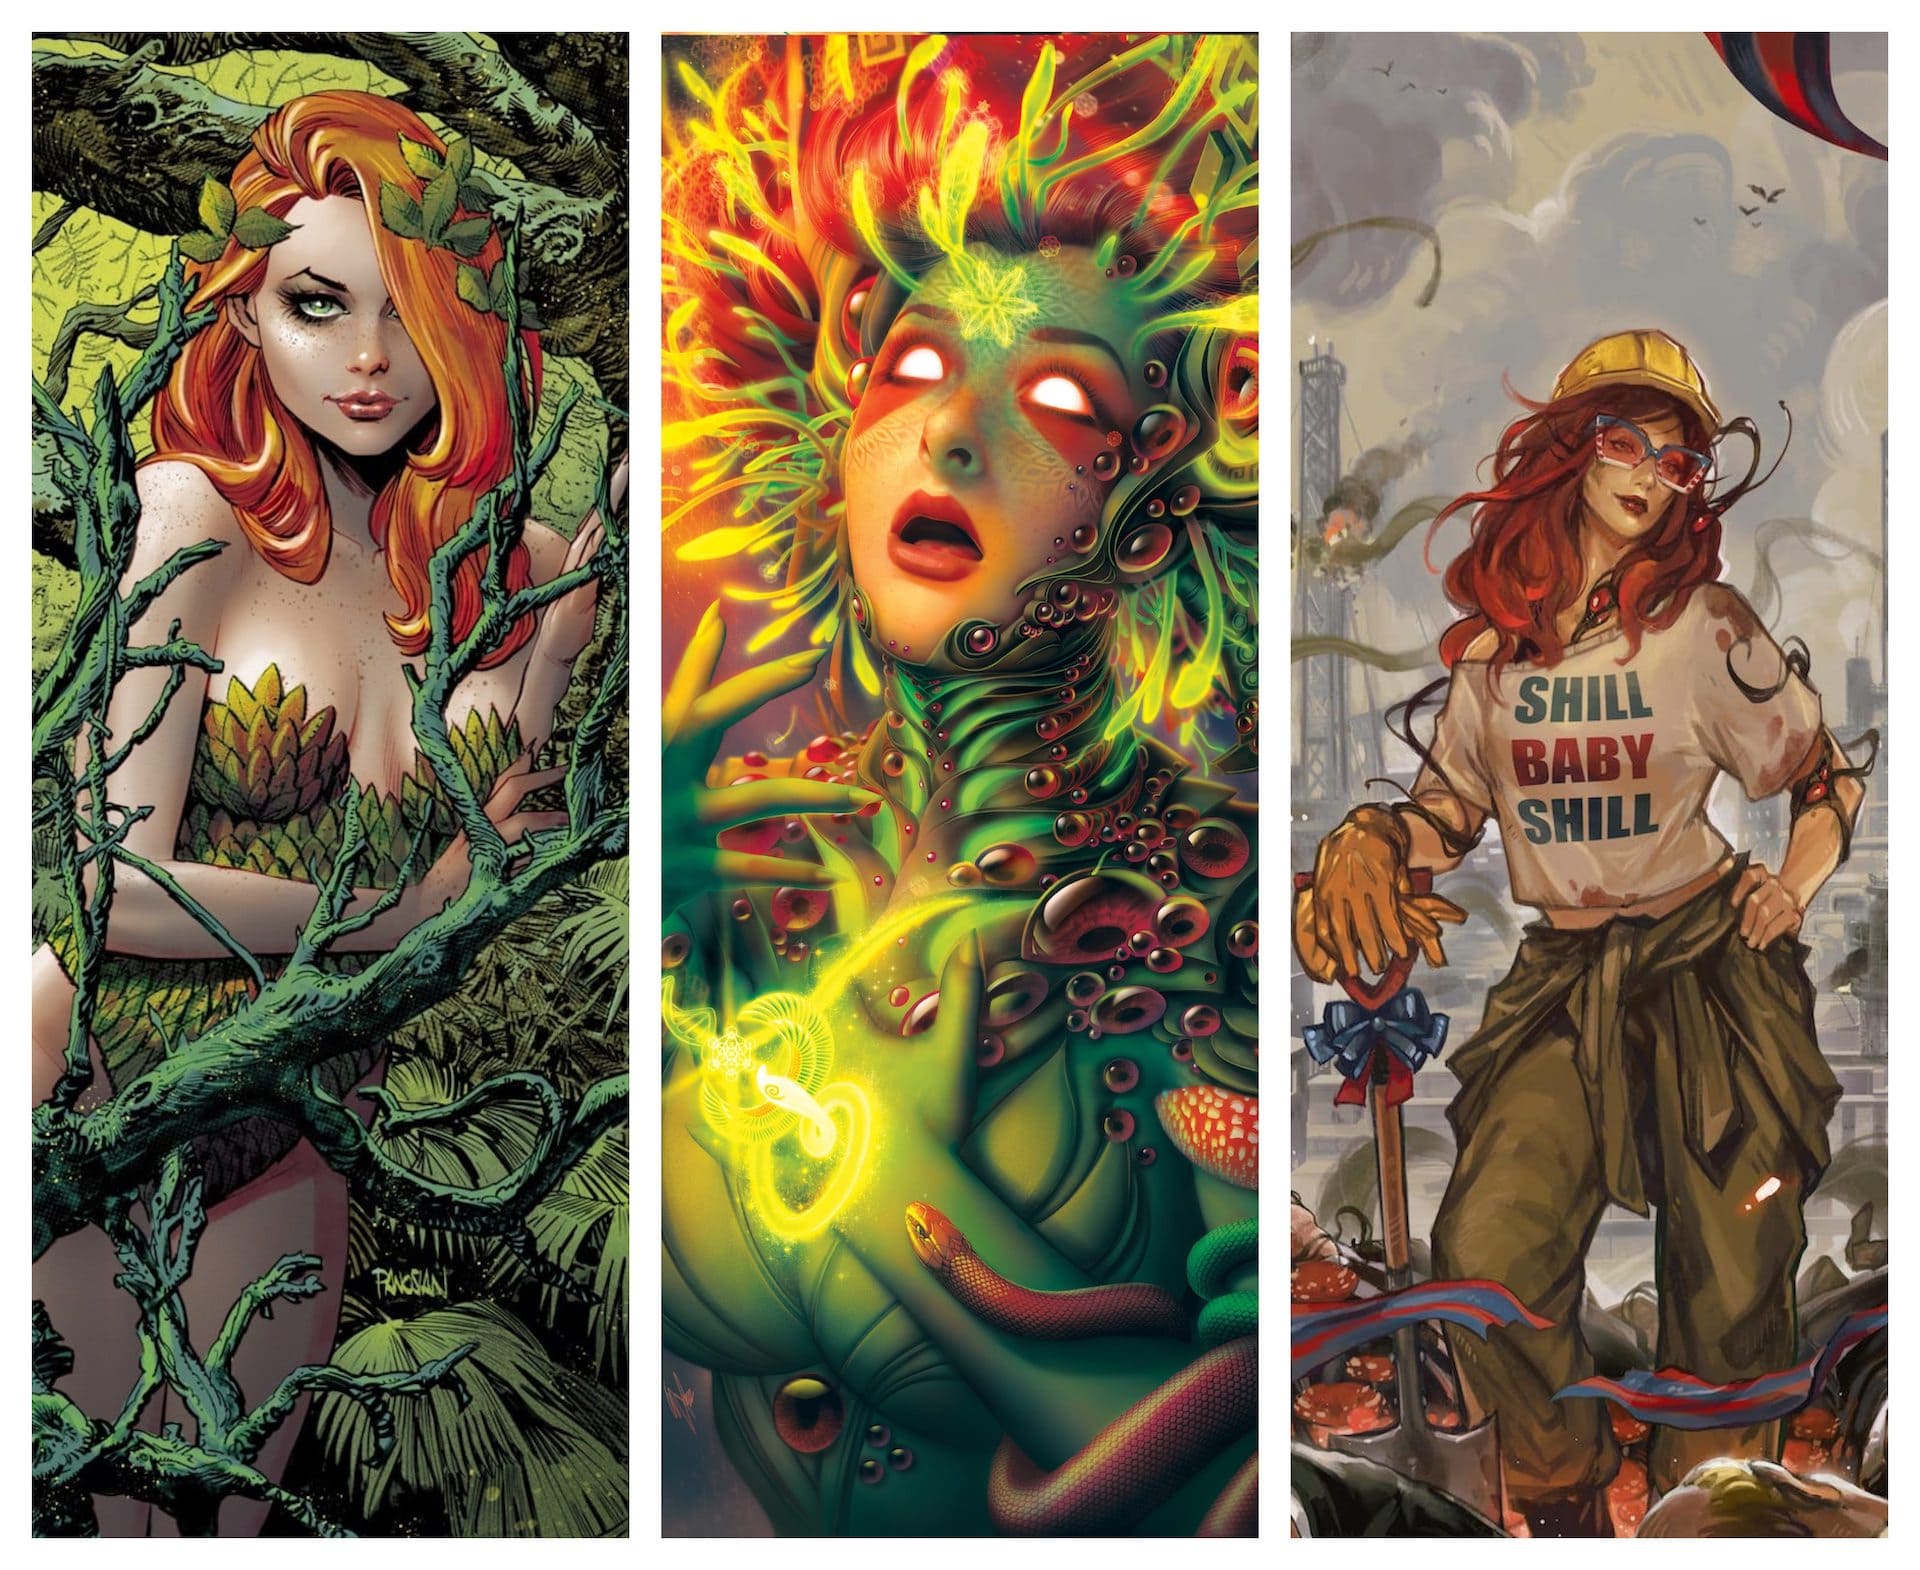 DC Comics extends 'Poison Ivy' for second six-issue story arc